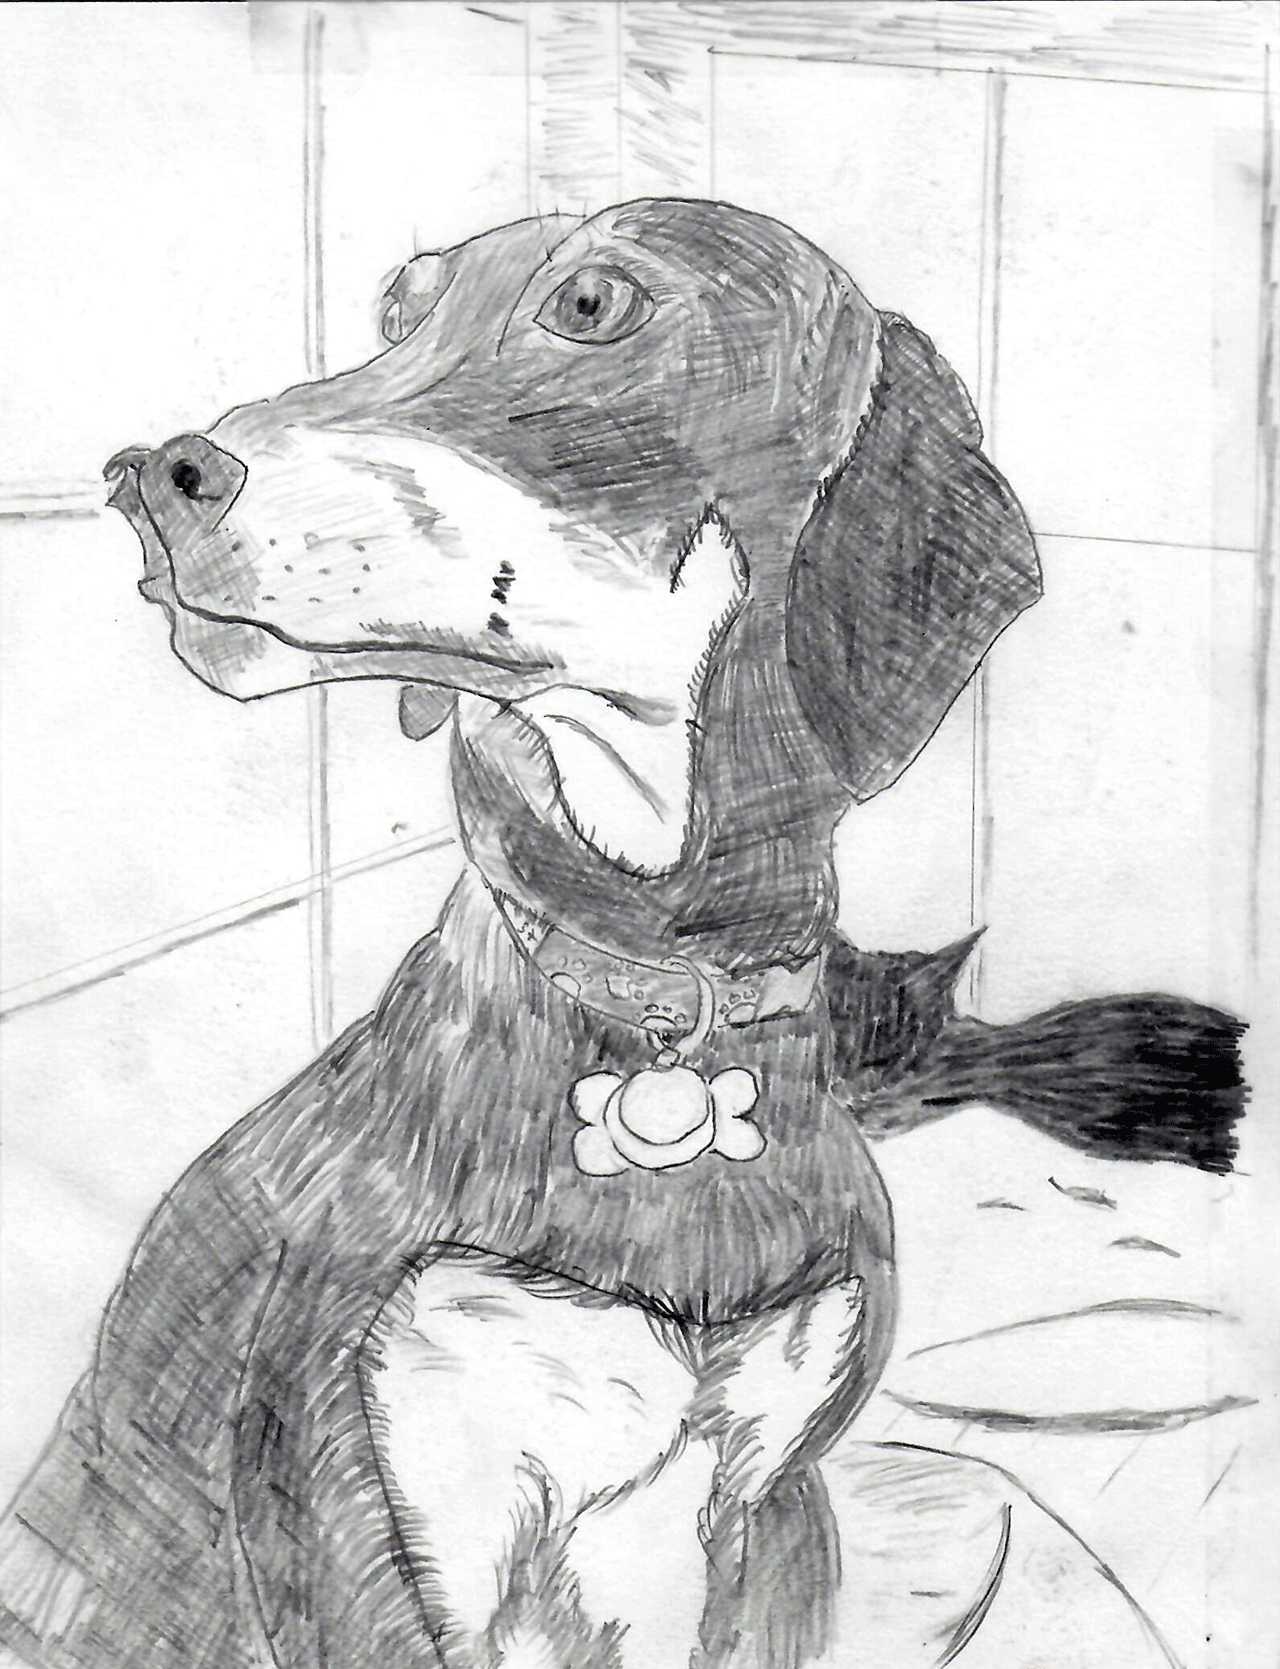 Rough drawing of my dog